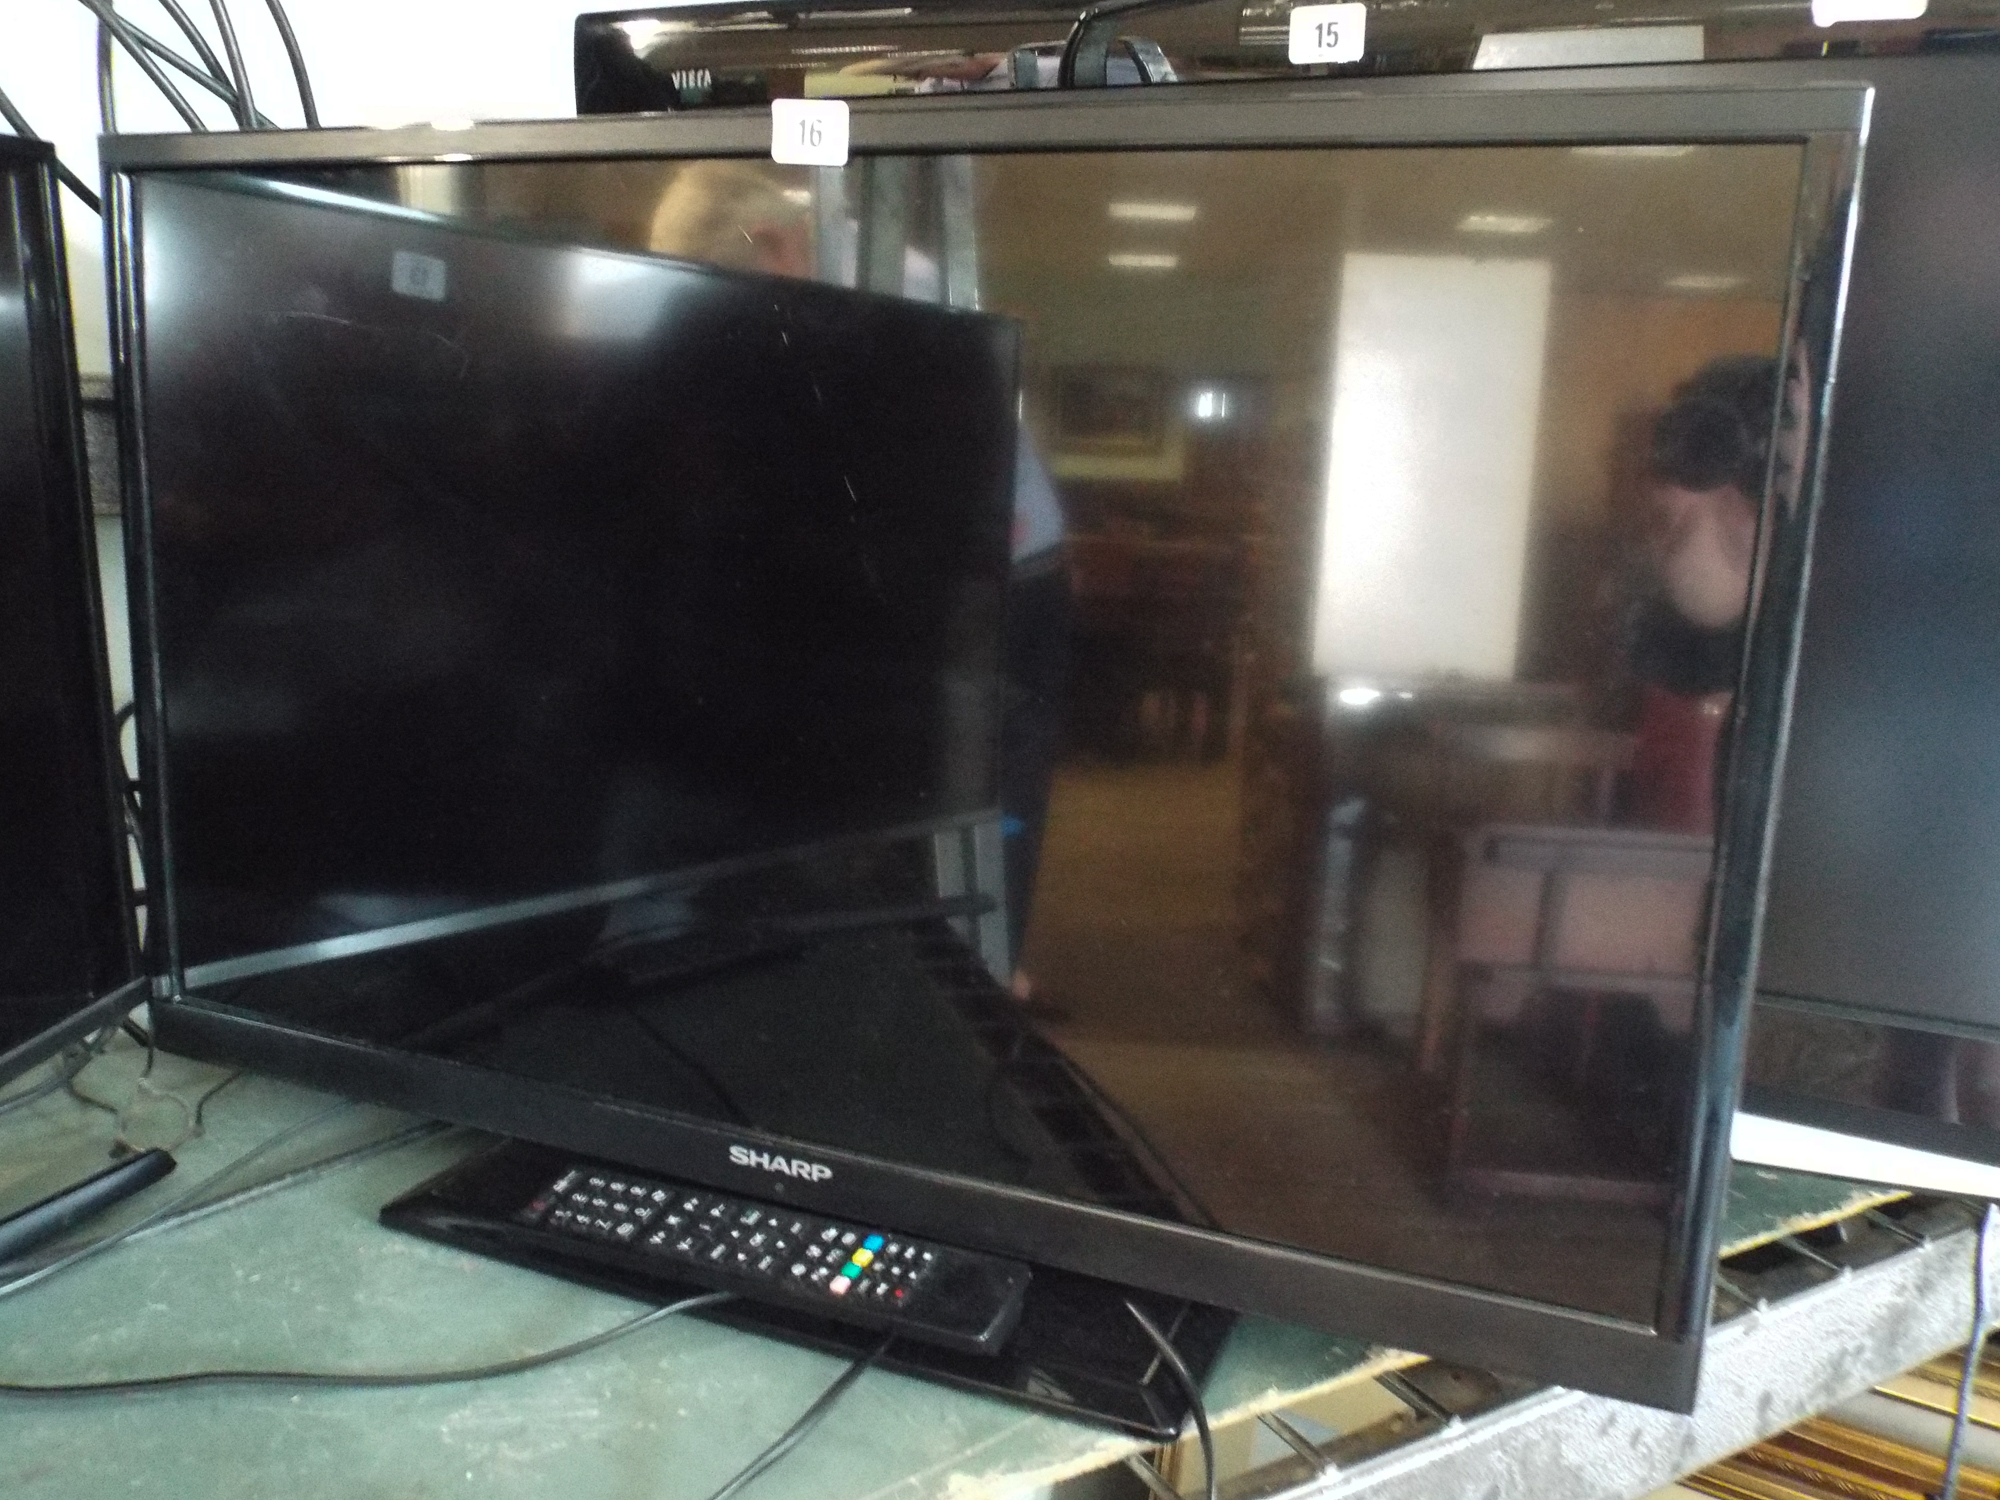 A Sharp 32" digital LCD TV with freeview etc